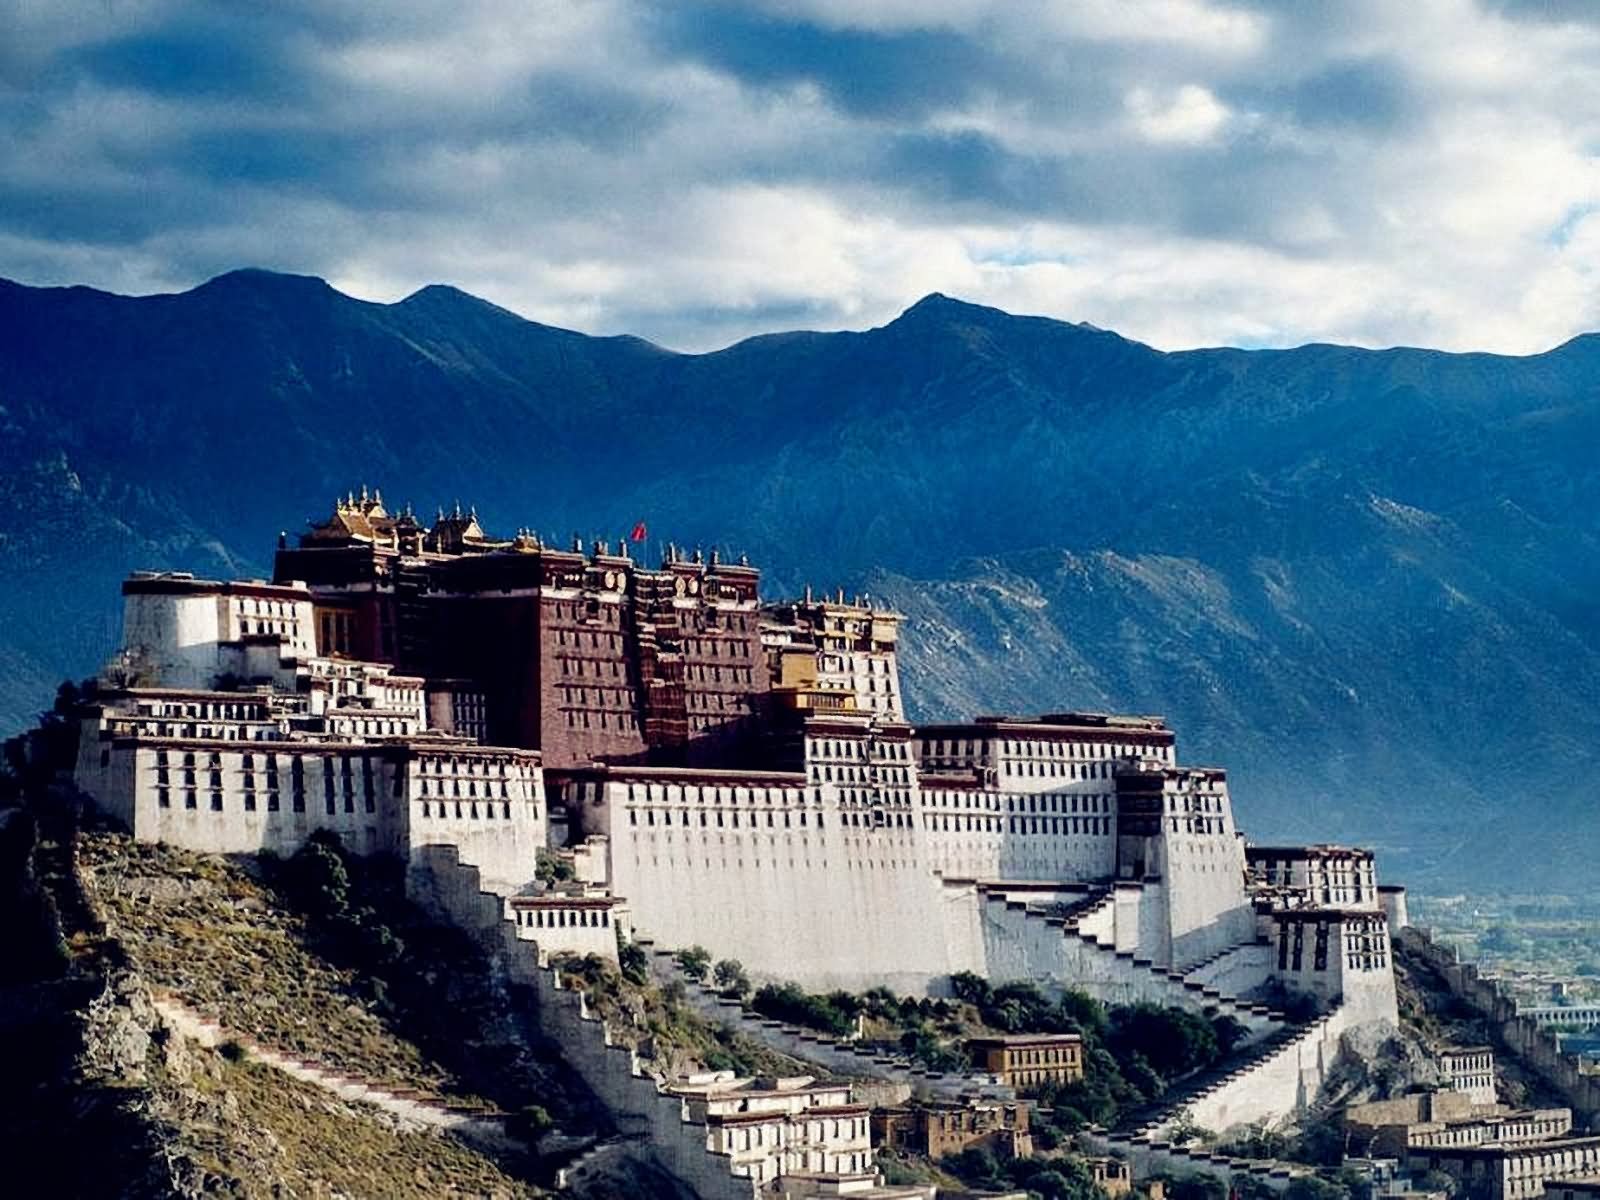 The Potala Palace On The Bank Of Lhasa River In Tibet